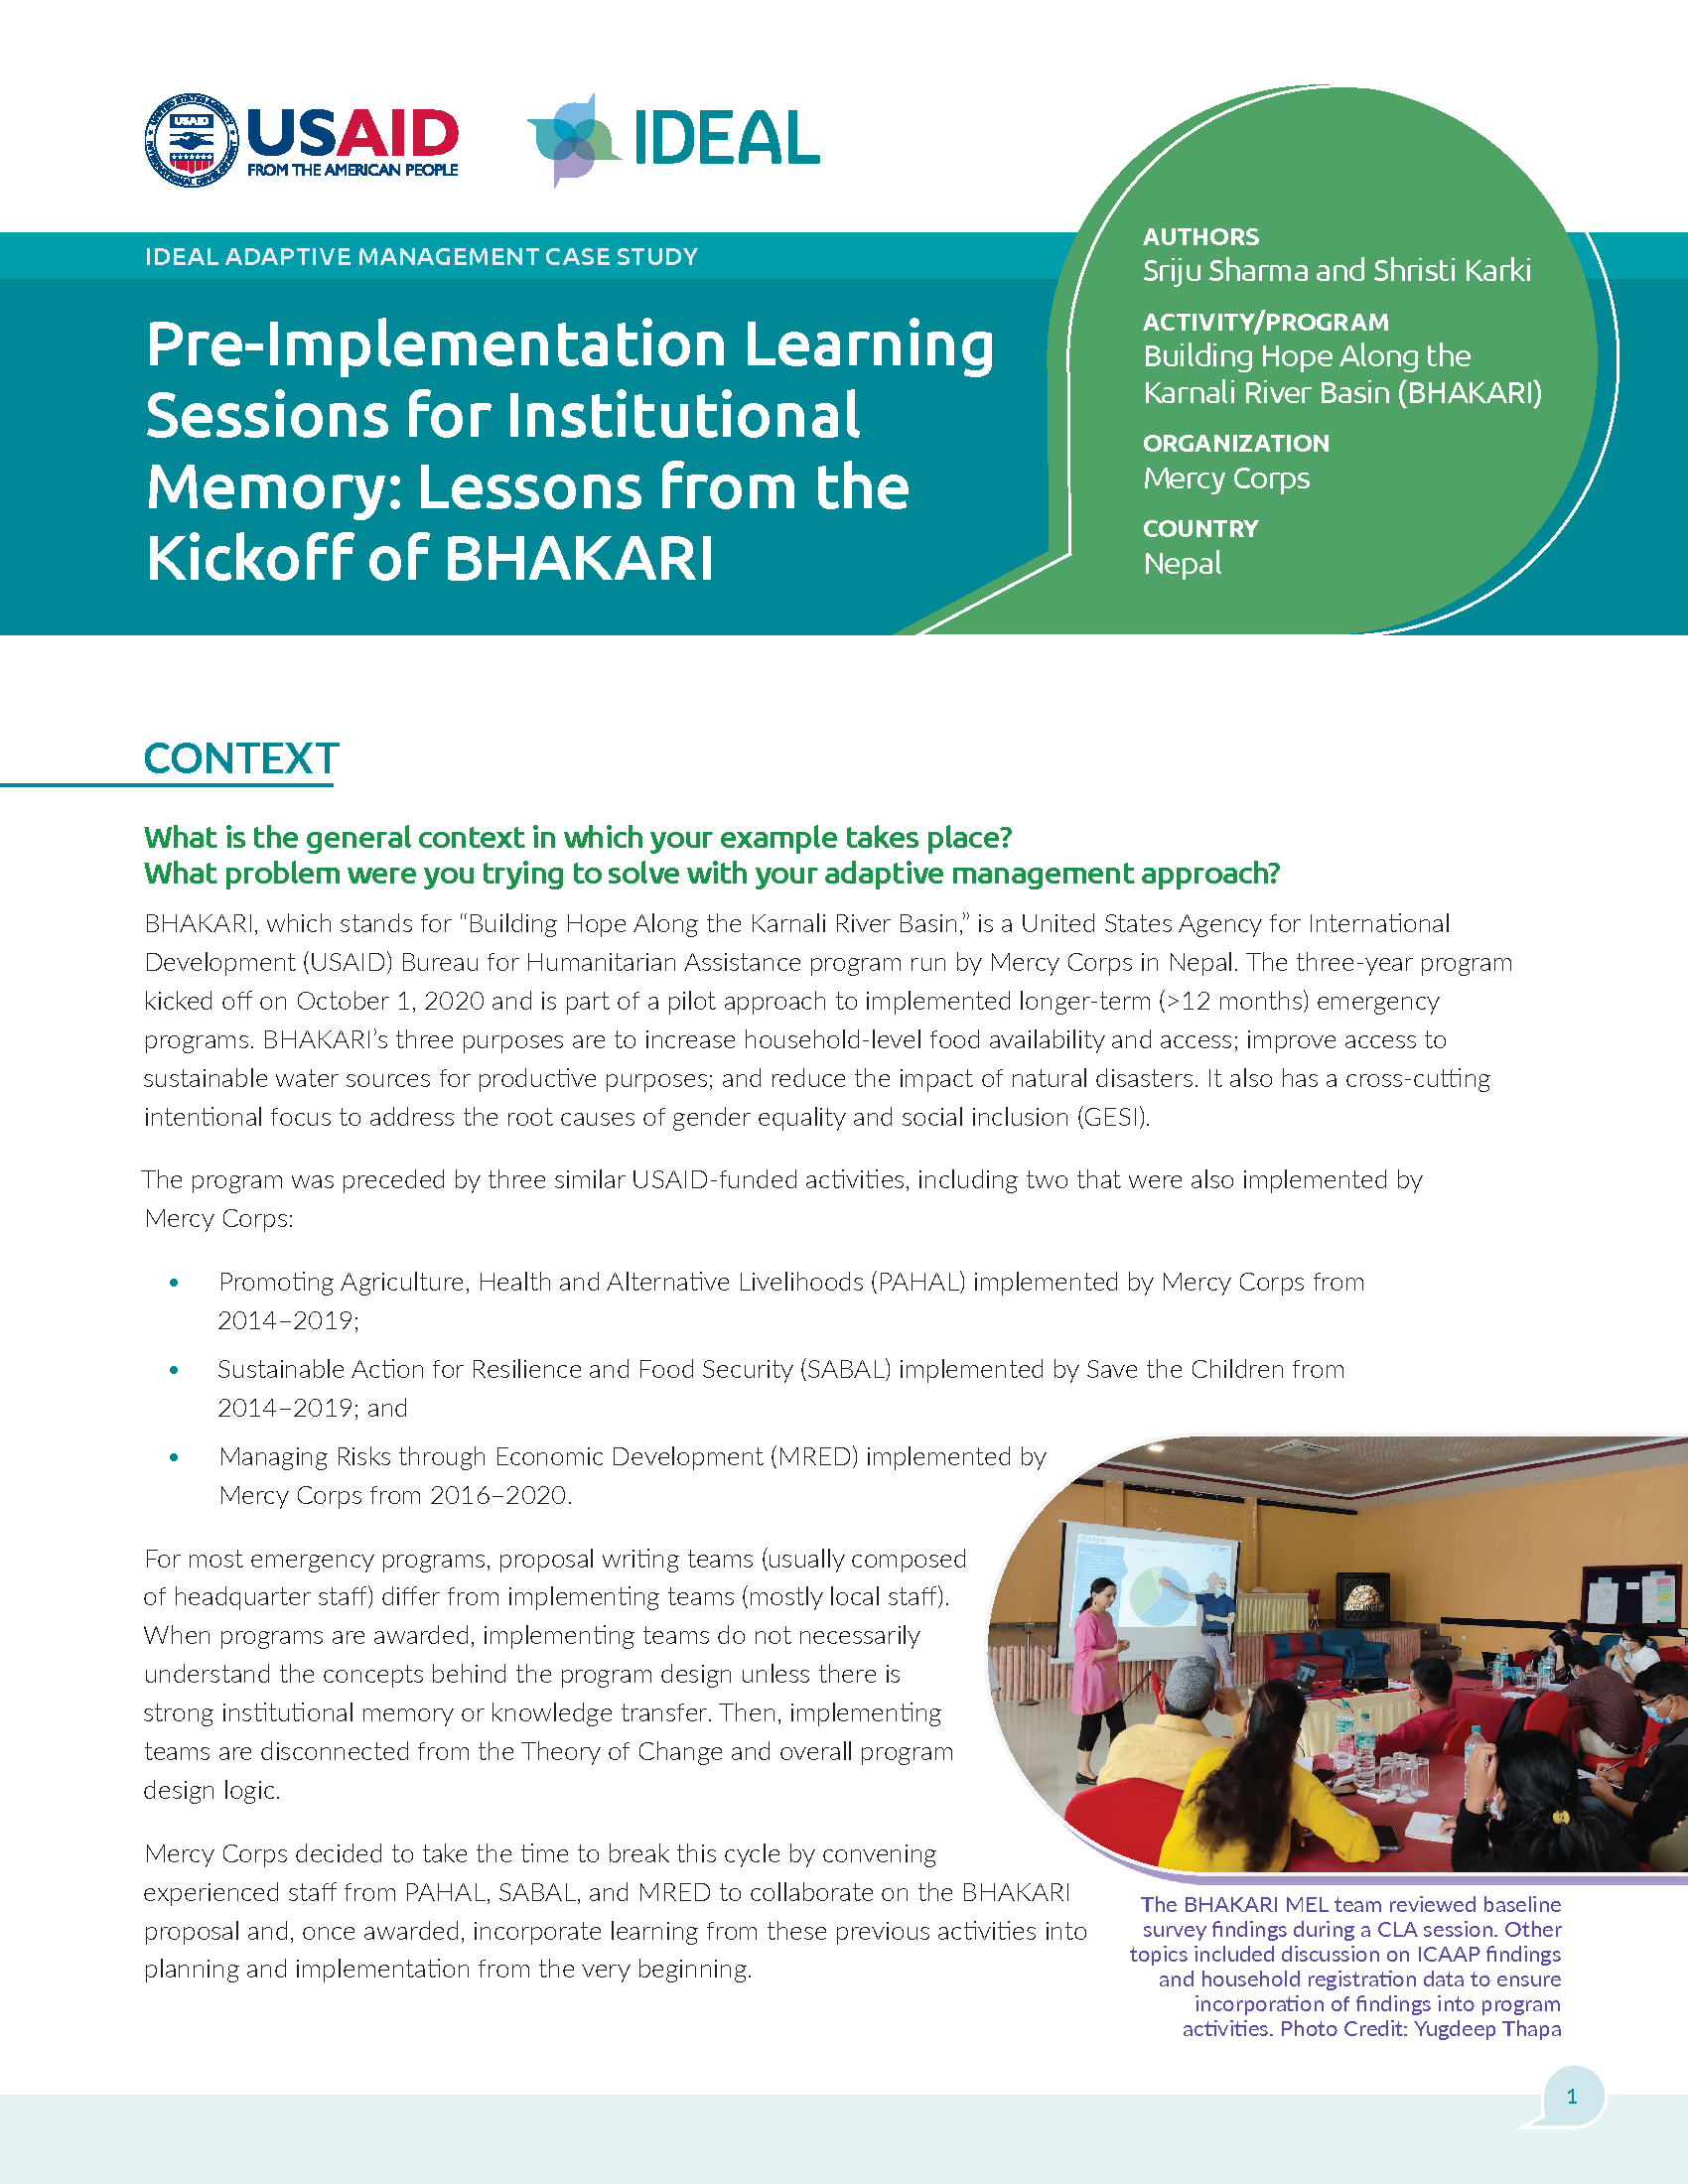 Cover page of Pre-Implementation Learning Sessions for Institutional Memory: Lessons from the Kickoff of BHAKARI document